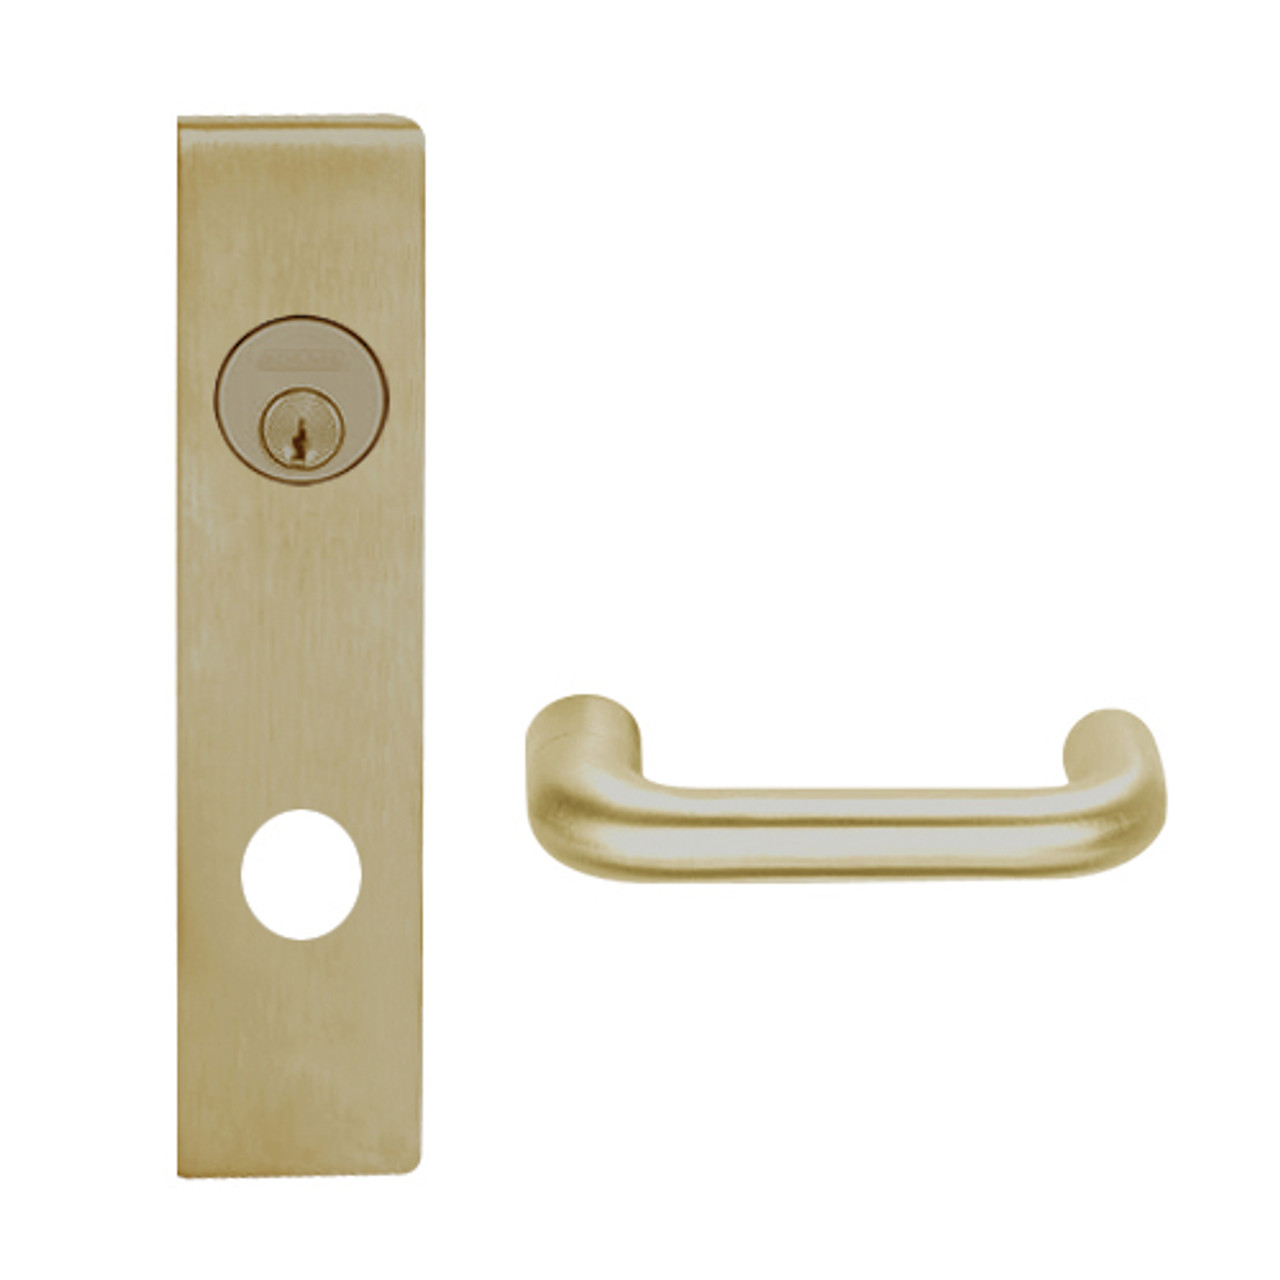 L9050P-03L-613 Schlage L Series Entrance Commercial Mortise Lock with 03 Cast Lever Design in Oil Rubbed Bronze